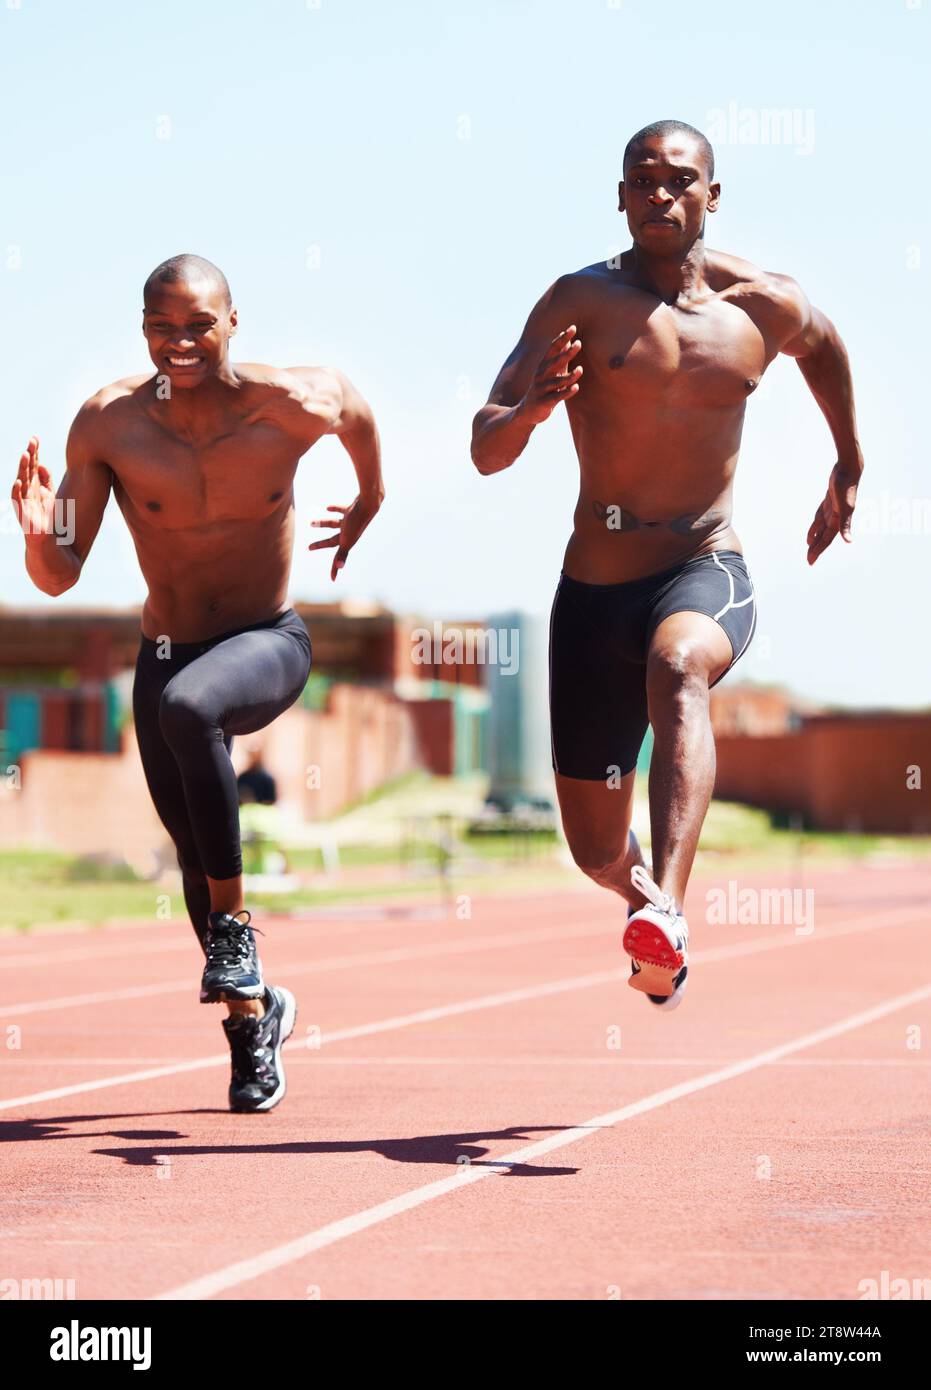 Man, athlete and running and competitive for race on track with practice for competition. Black people, together and passion for sport with dedication Stock Photo